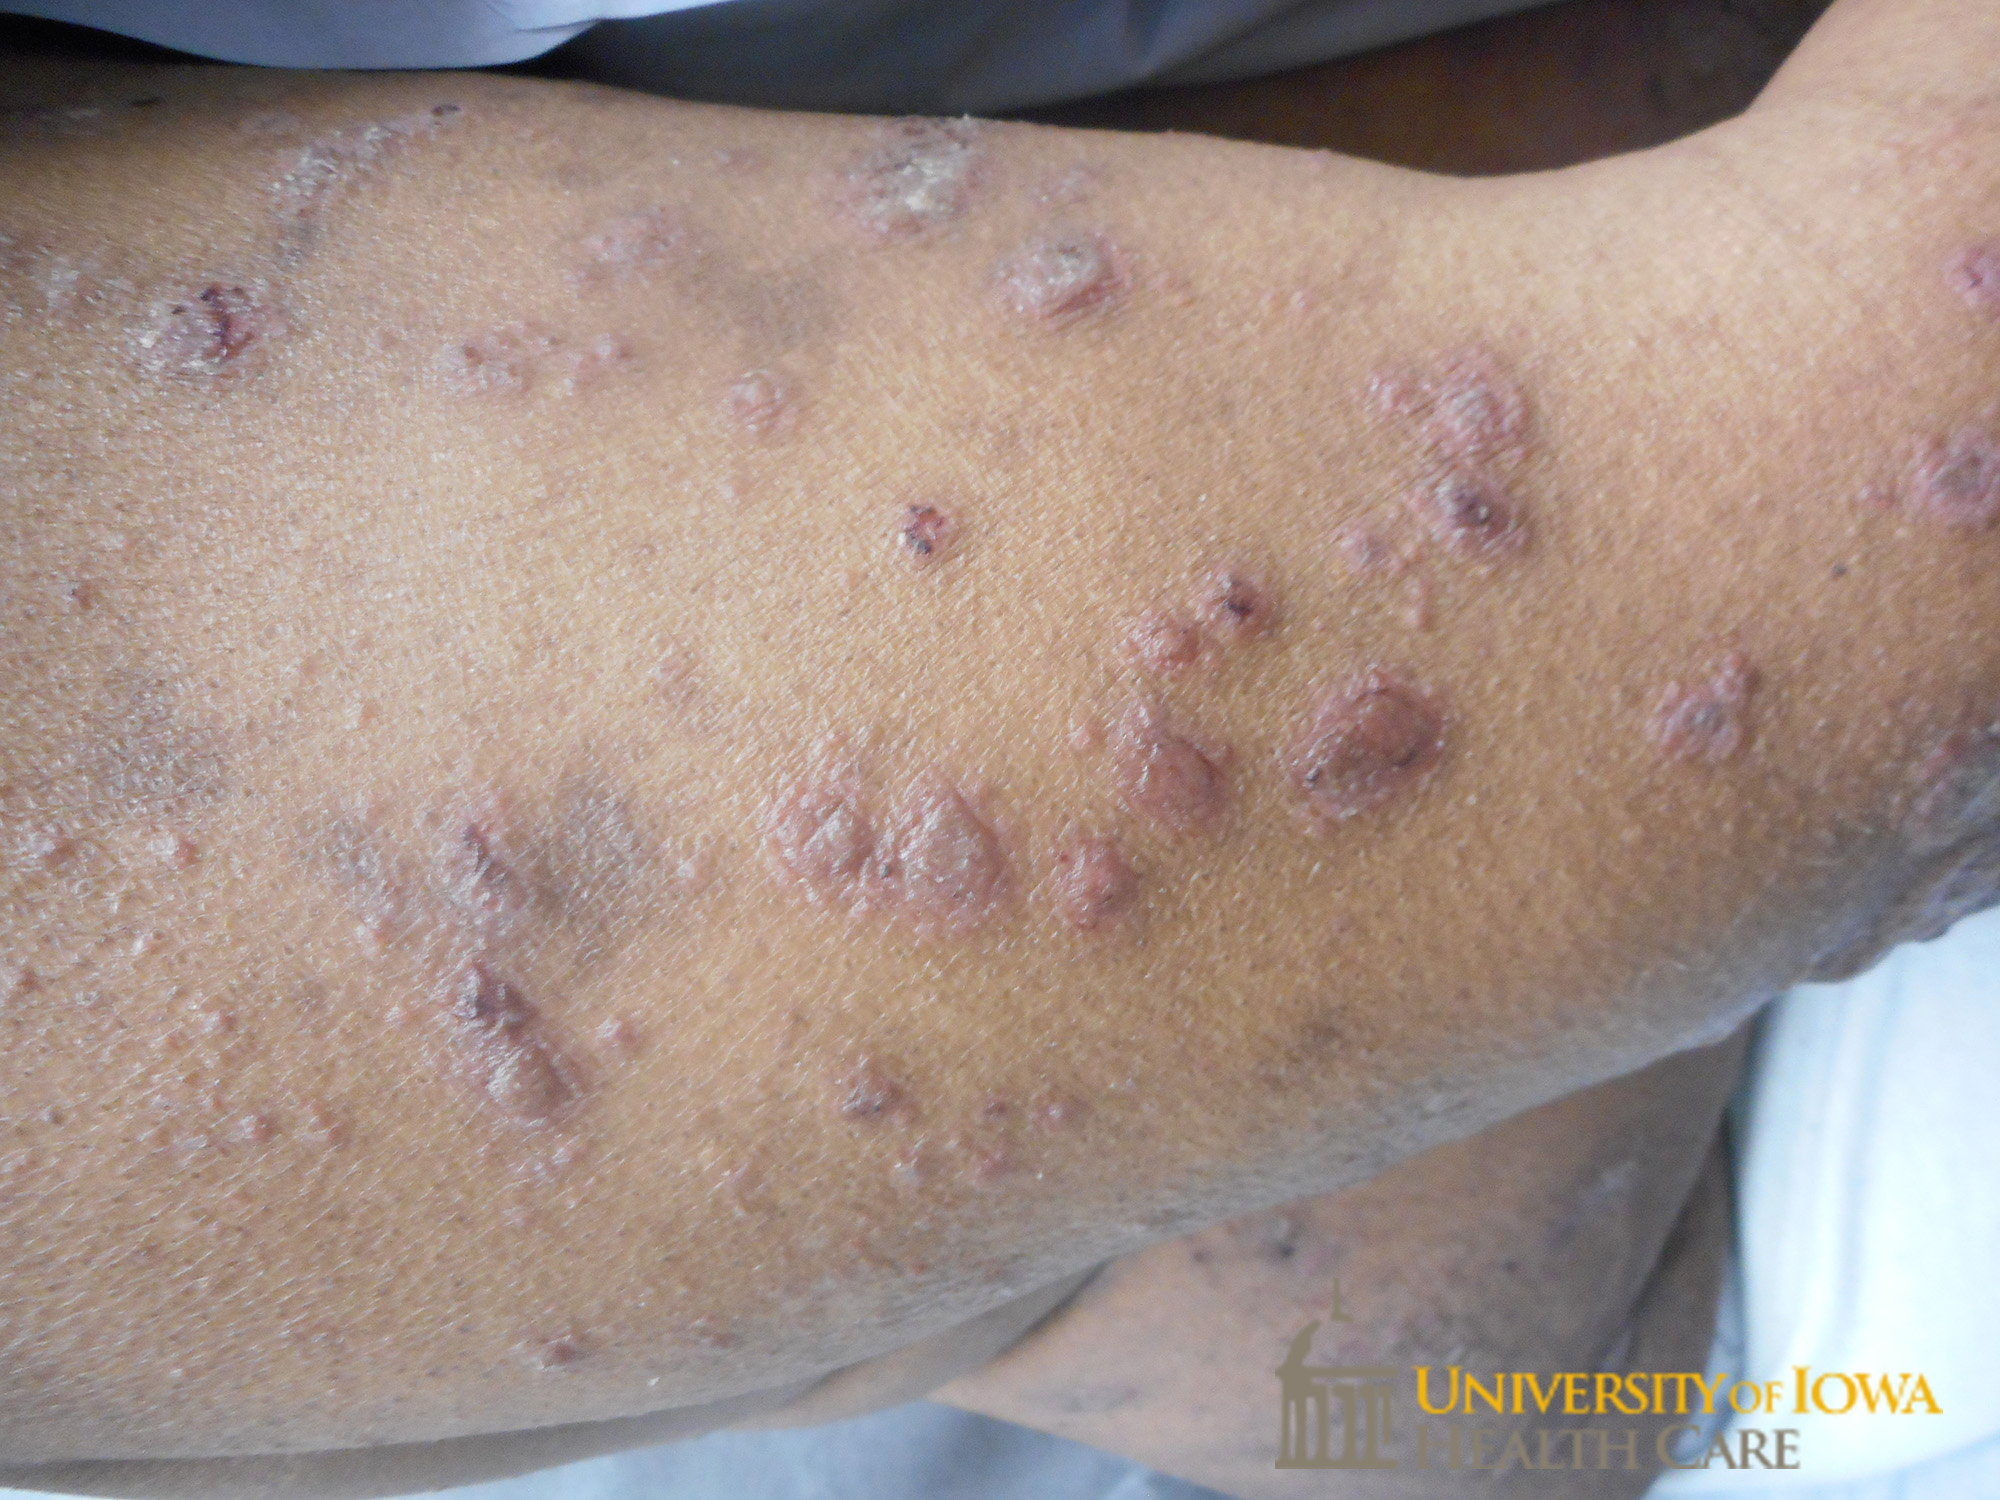 Pink to violaceous papules and plaques with silvery scale  on the extremity. (click images for higher resolution).